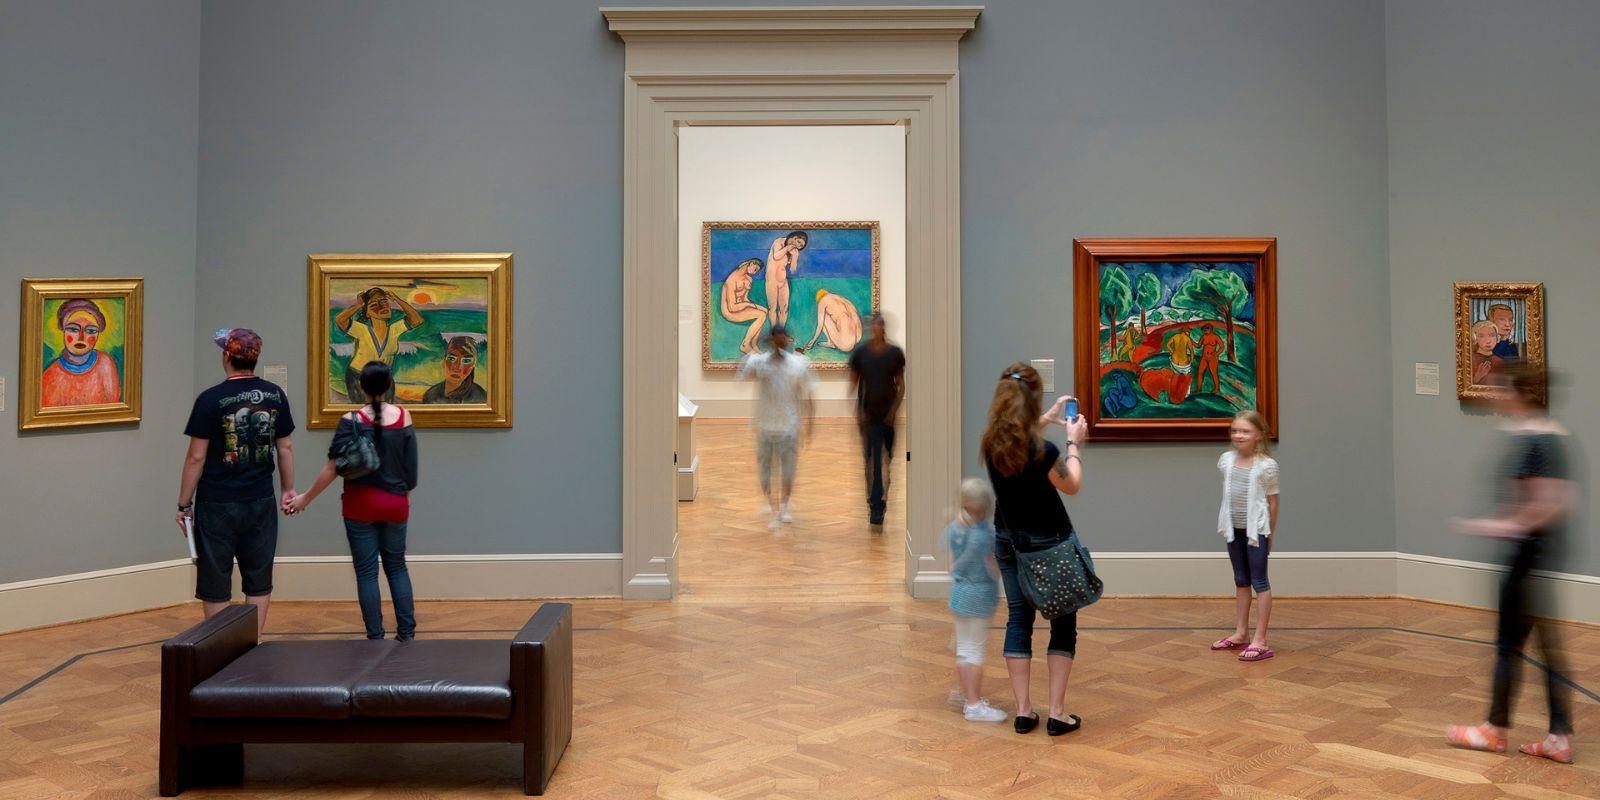 The Saint Louis Art Museum is a free, world-class museum in Forest Park.